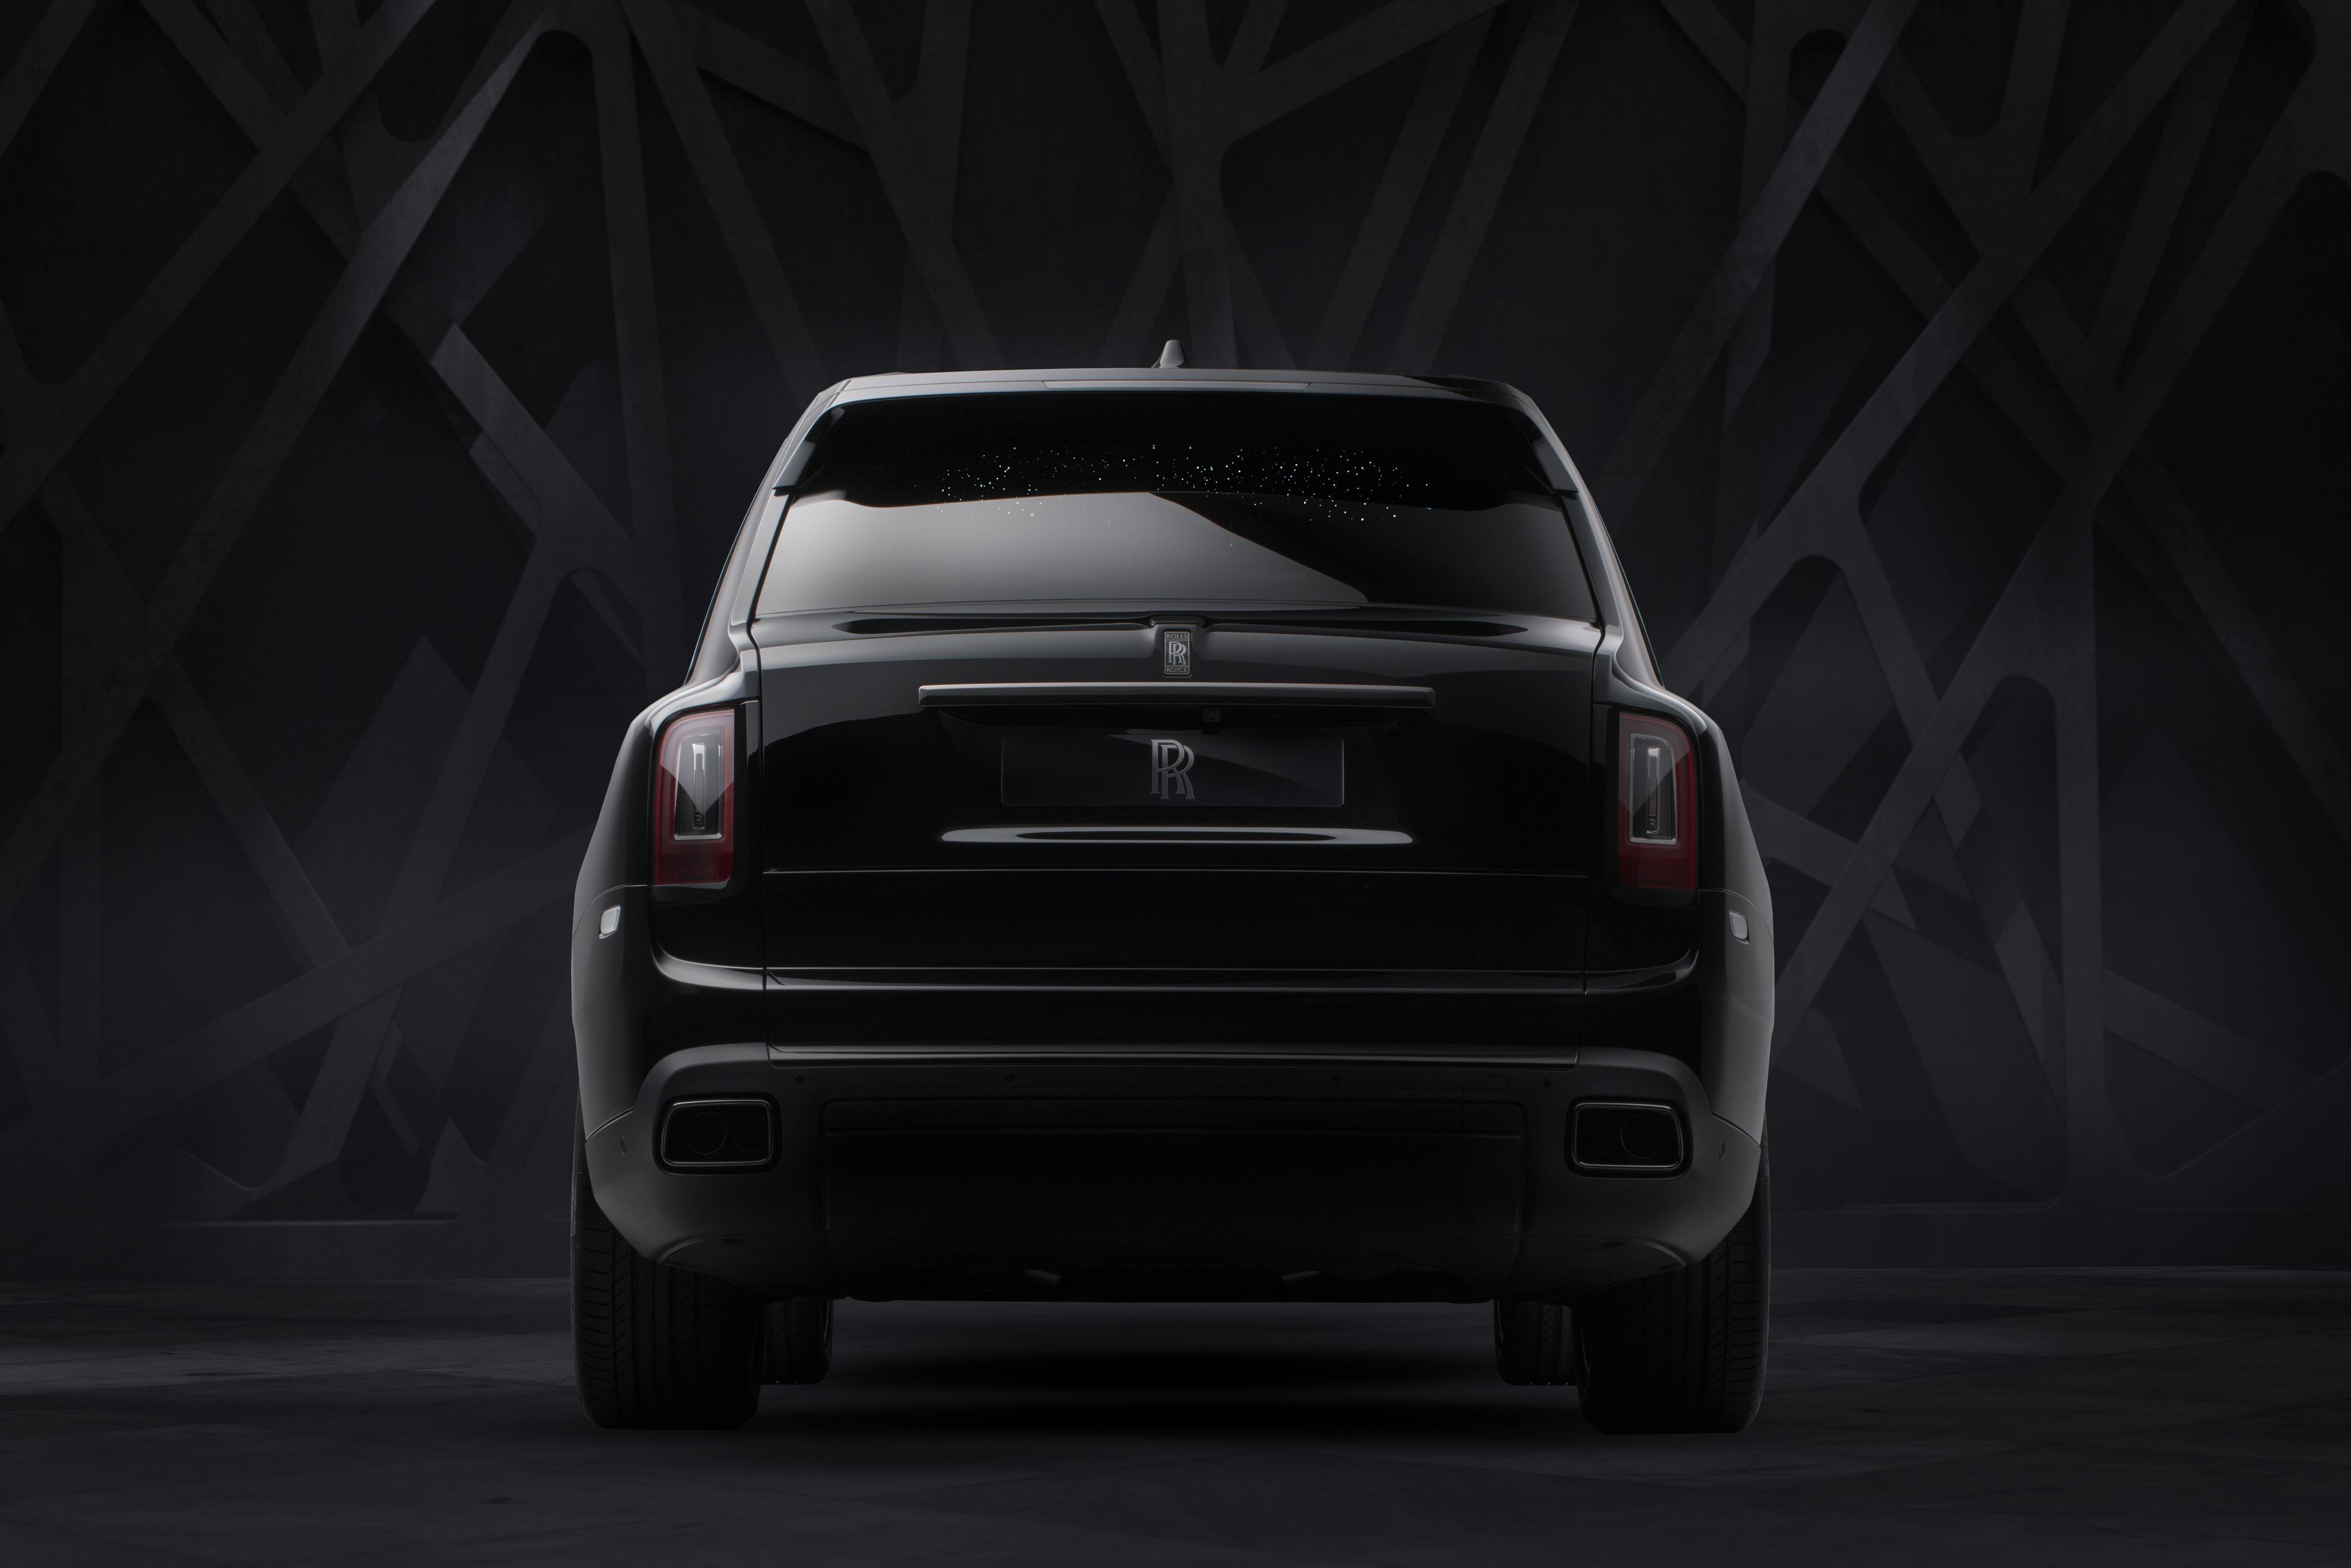 The Cullinan is one of the most luxurious SUVs on sale